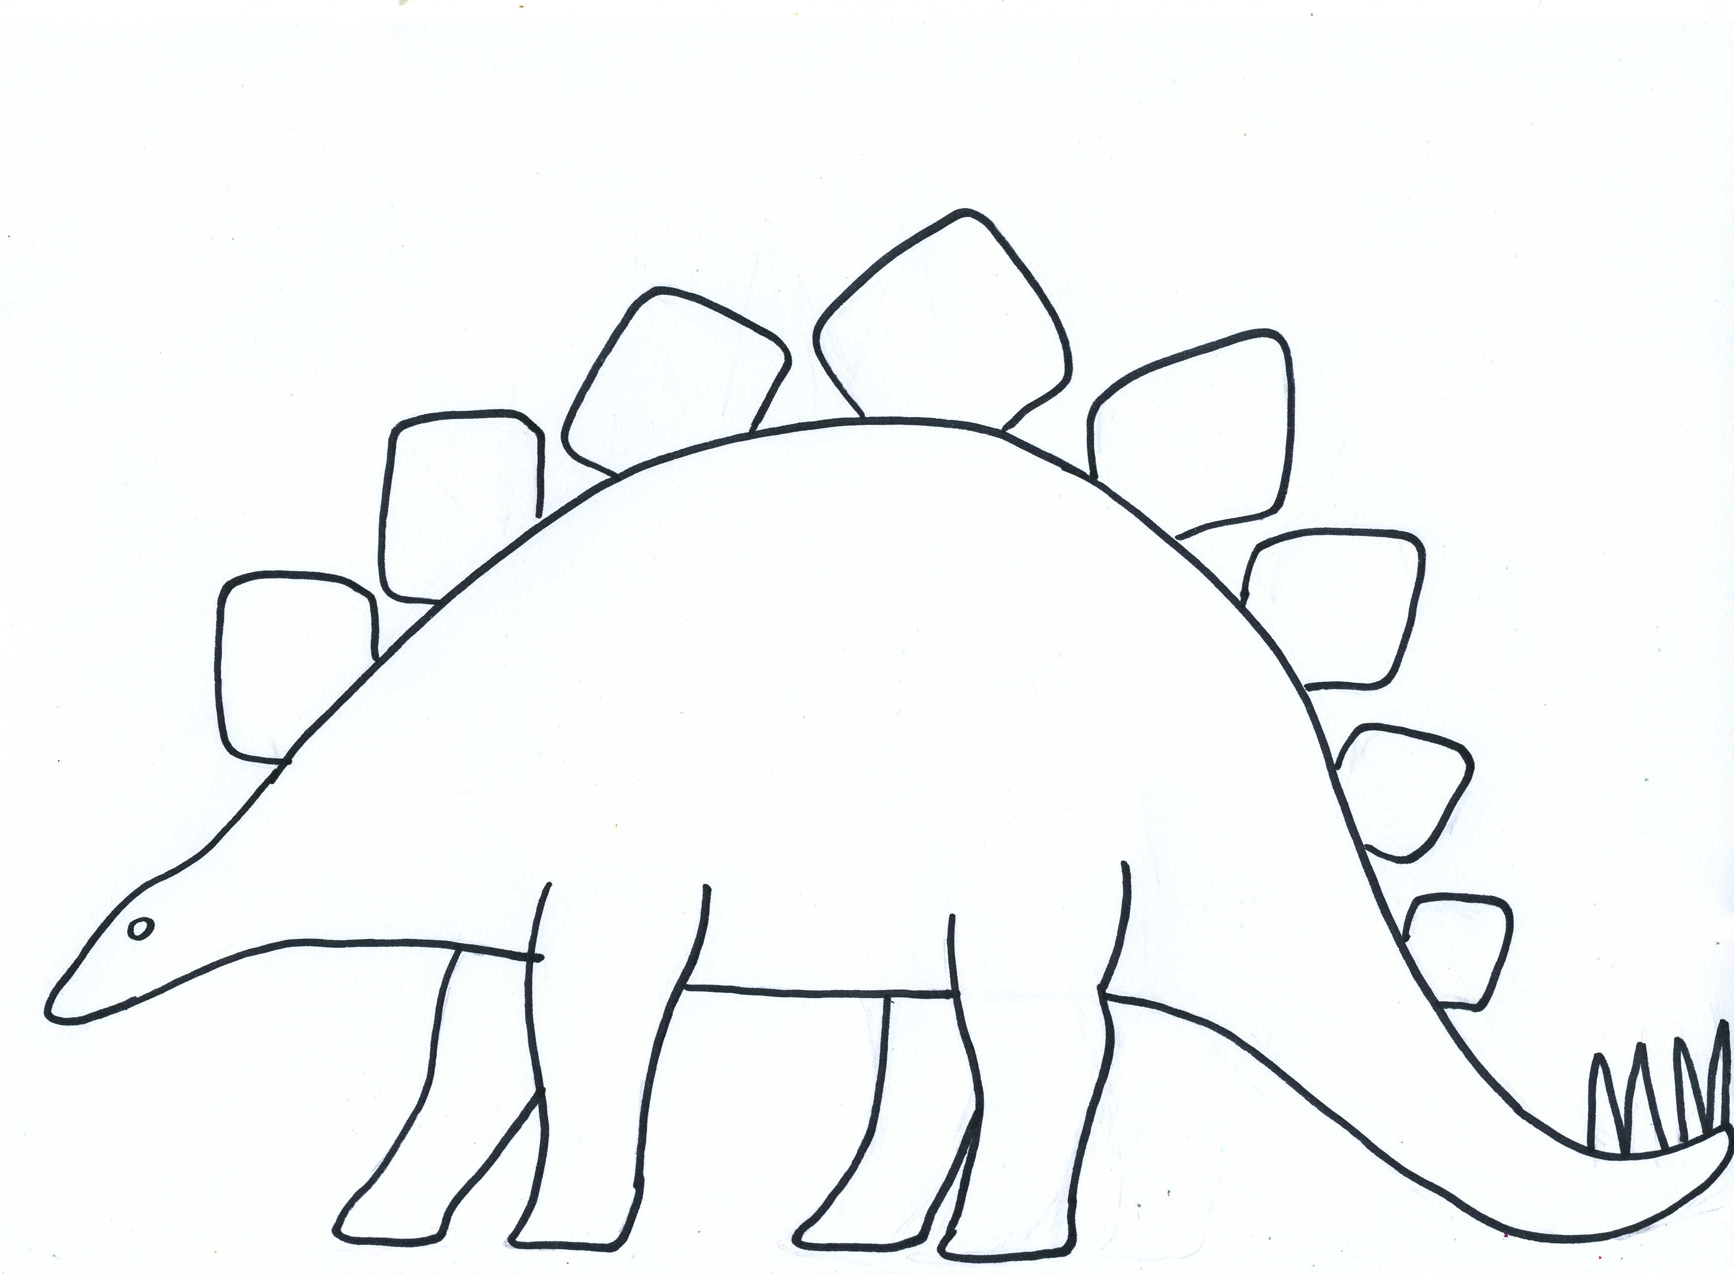 6 Best Images of Dinosaurs Printables Cut Out Templates Dinosaur